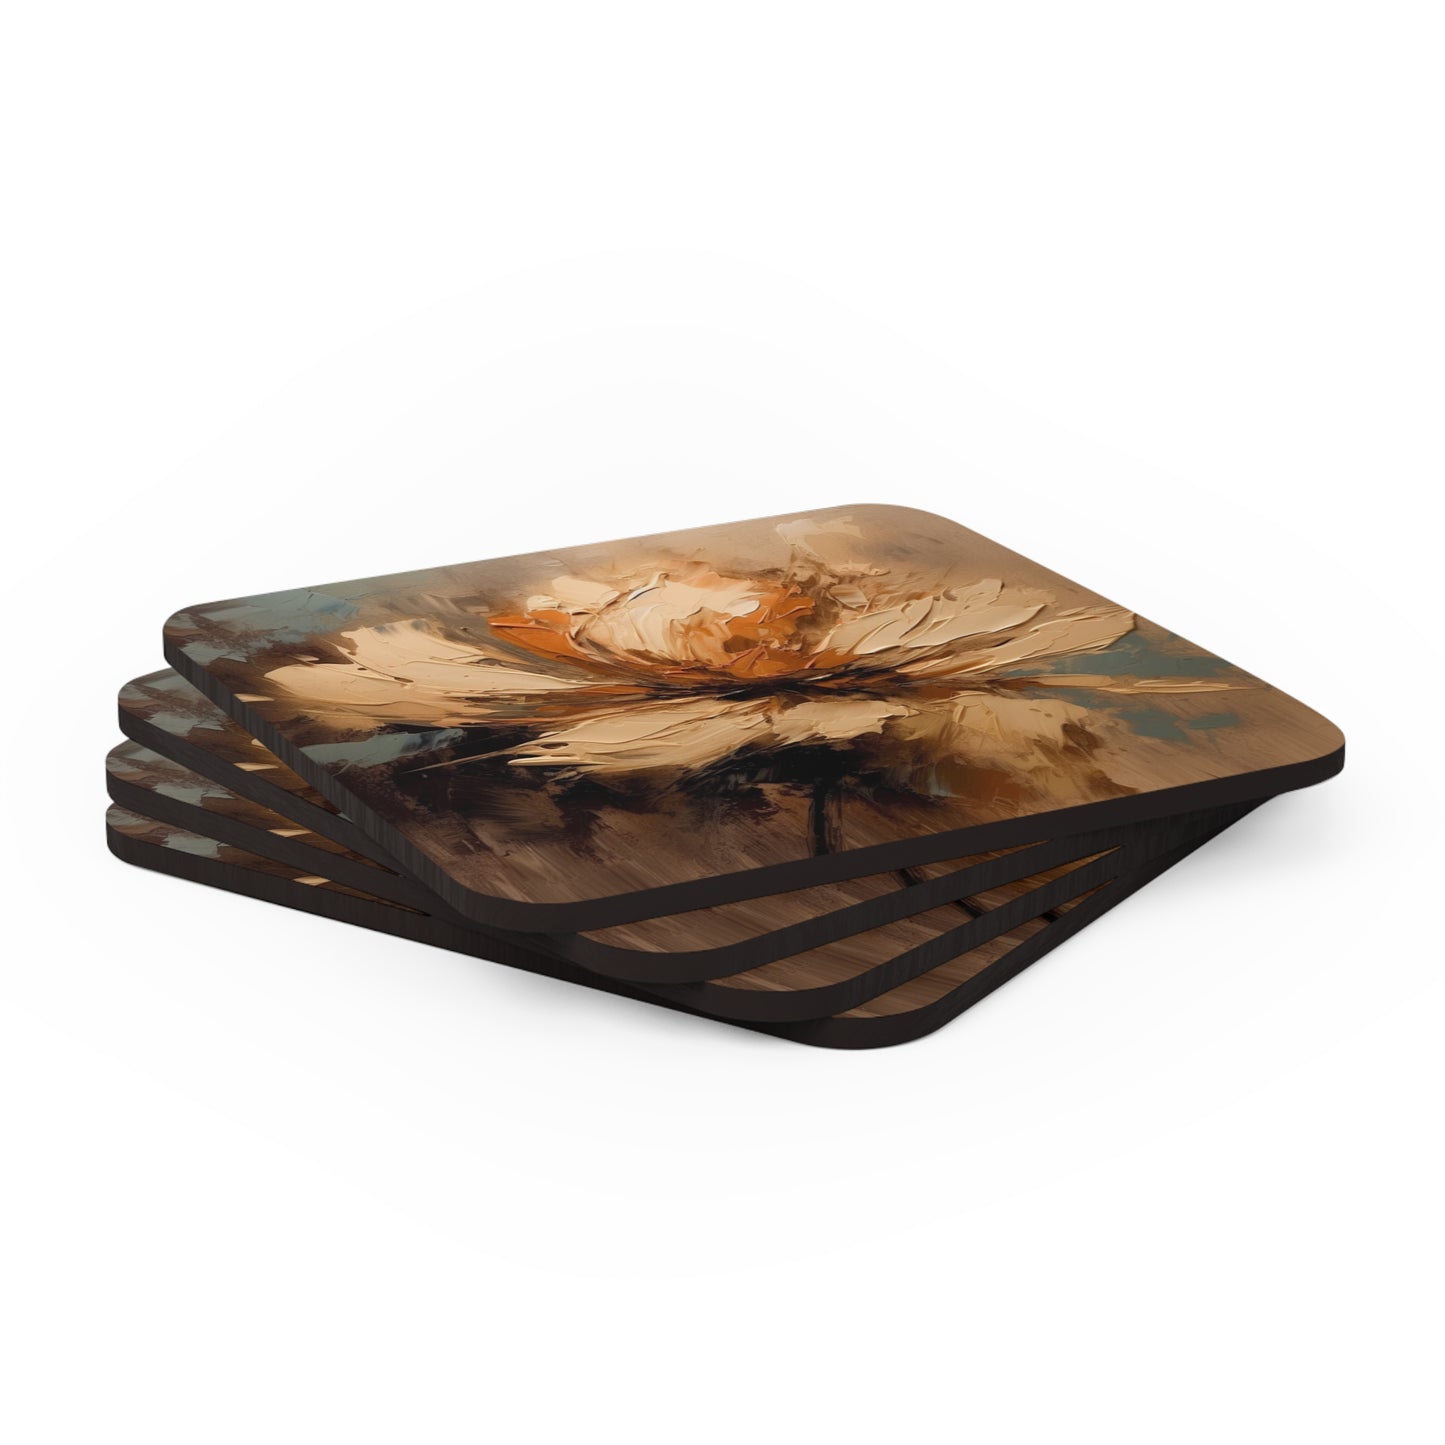 Artistic Fusion: Corkwood Coaster Set Infused with Tan Hua-Inspired Abstract Art